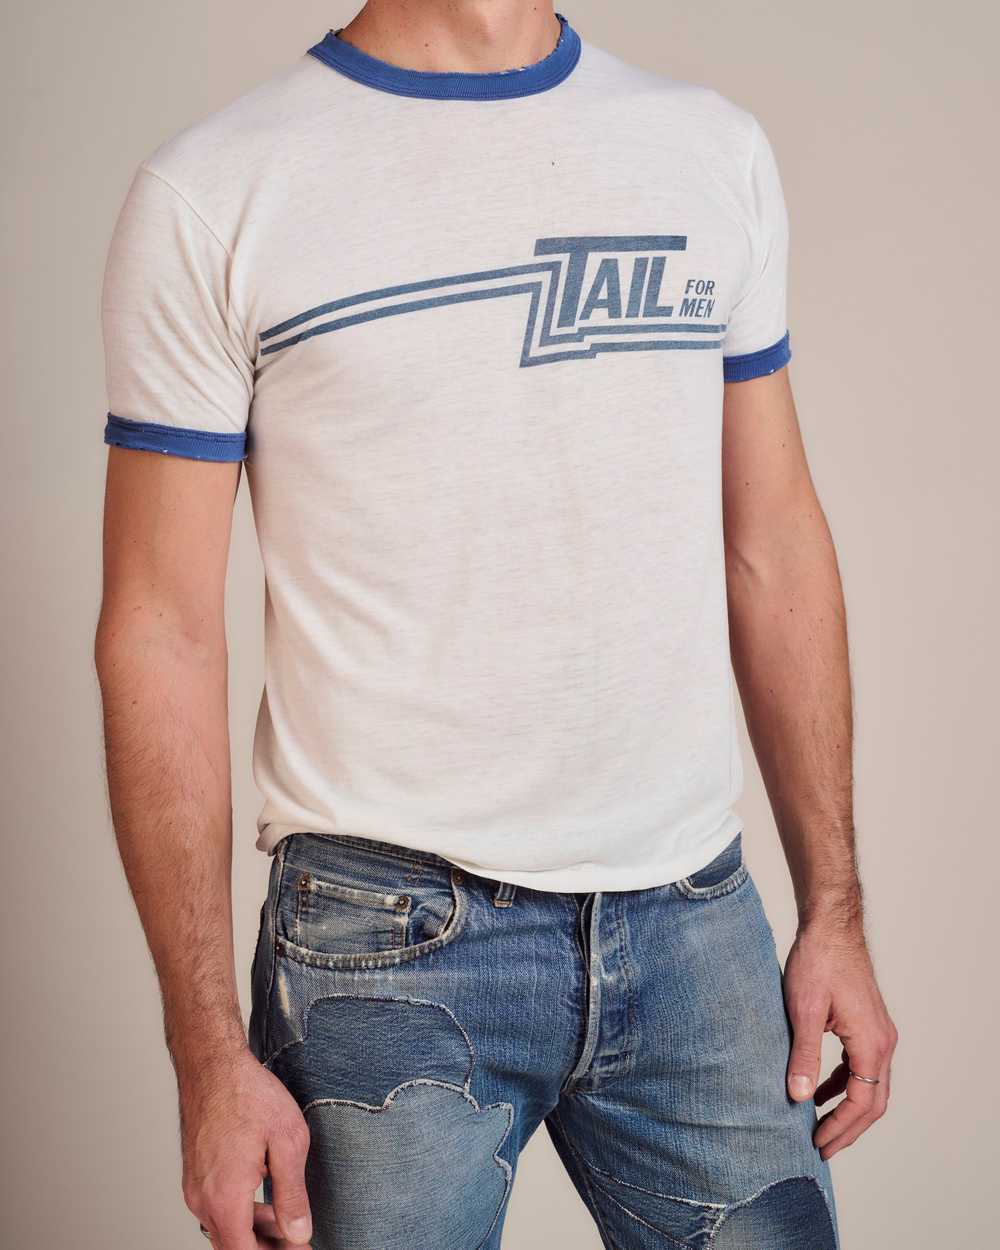 70's Tail For Men T-Shirt - image 2